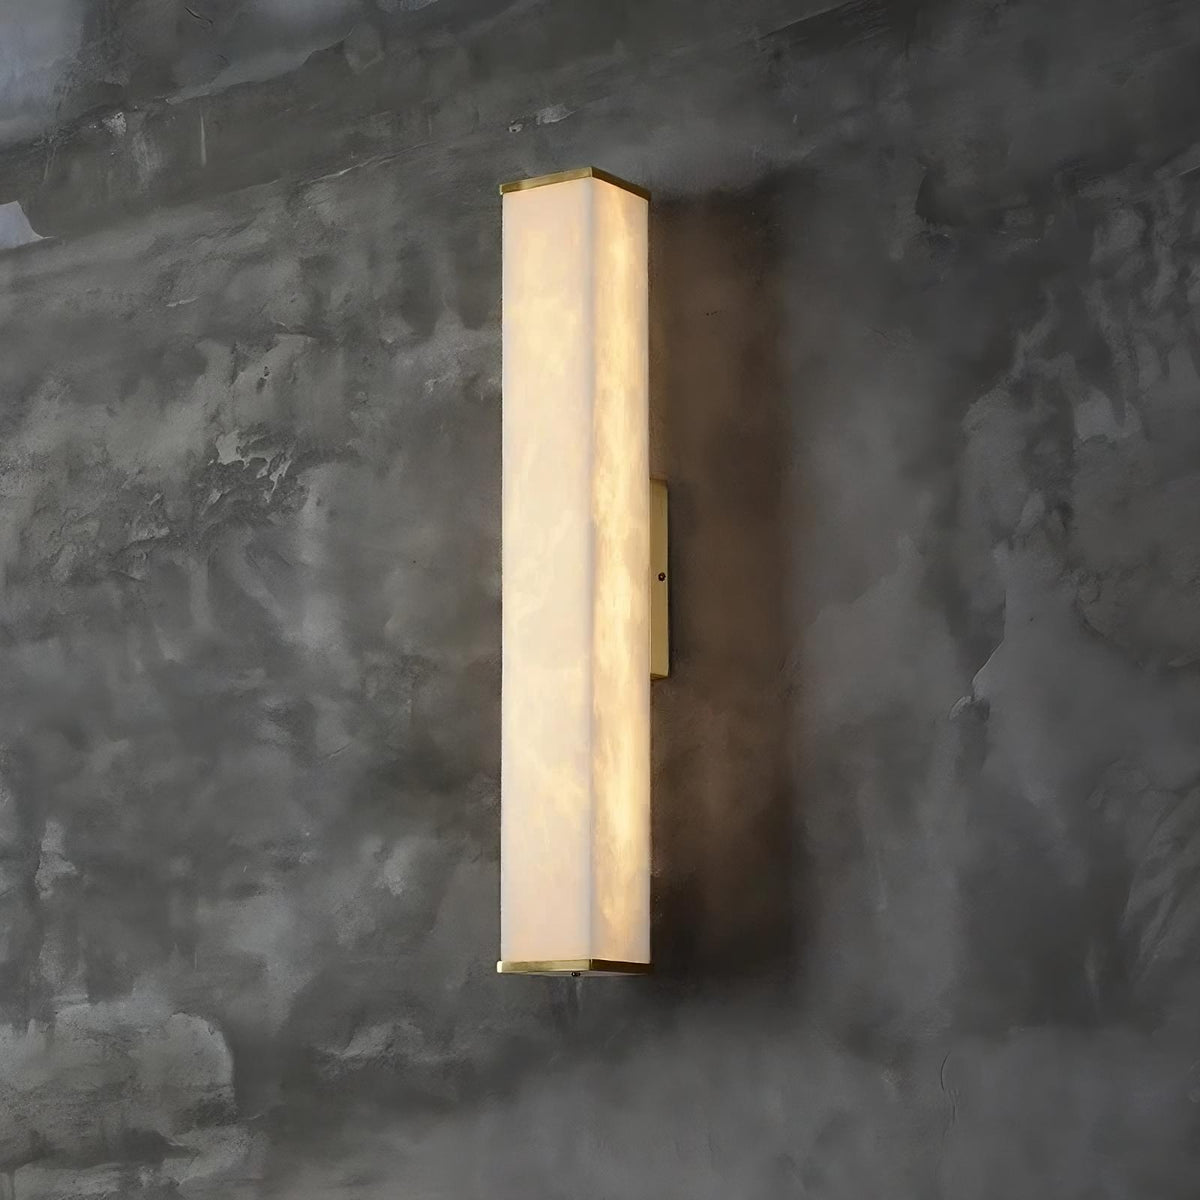 A modern, vertically oriented Natural Marble Indoor Wall Sconce Light by Morsale.com with a rectangular design emits a soft, warm light. The sconce is mounted on a textured, dark gray concrete wall, providing a sleek and contemporary aesthetic.